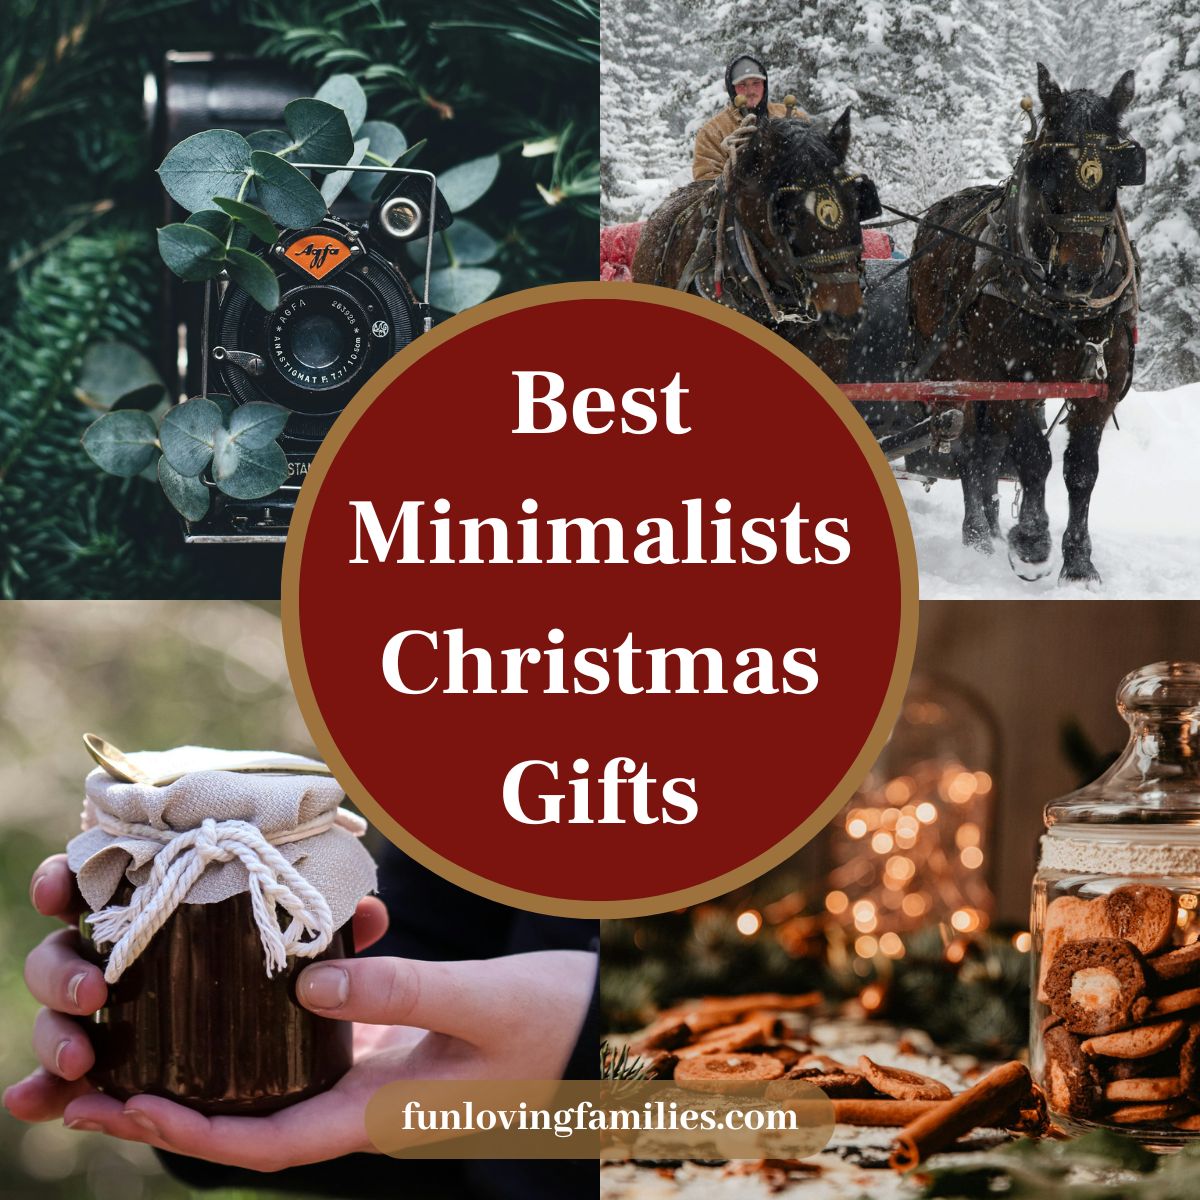 50+ Christmas Gifts for Minimalists